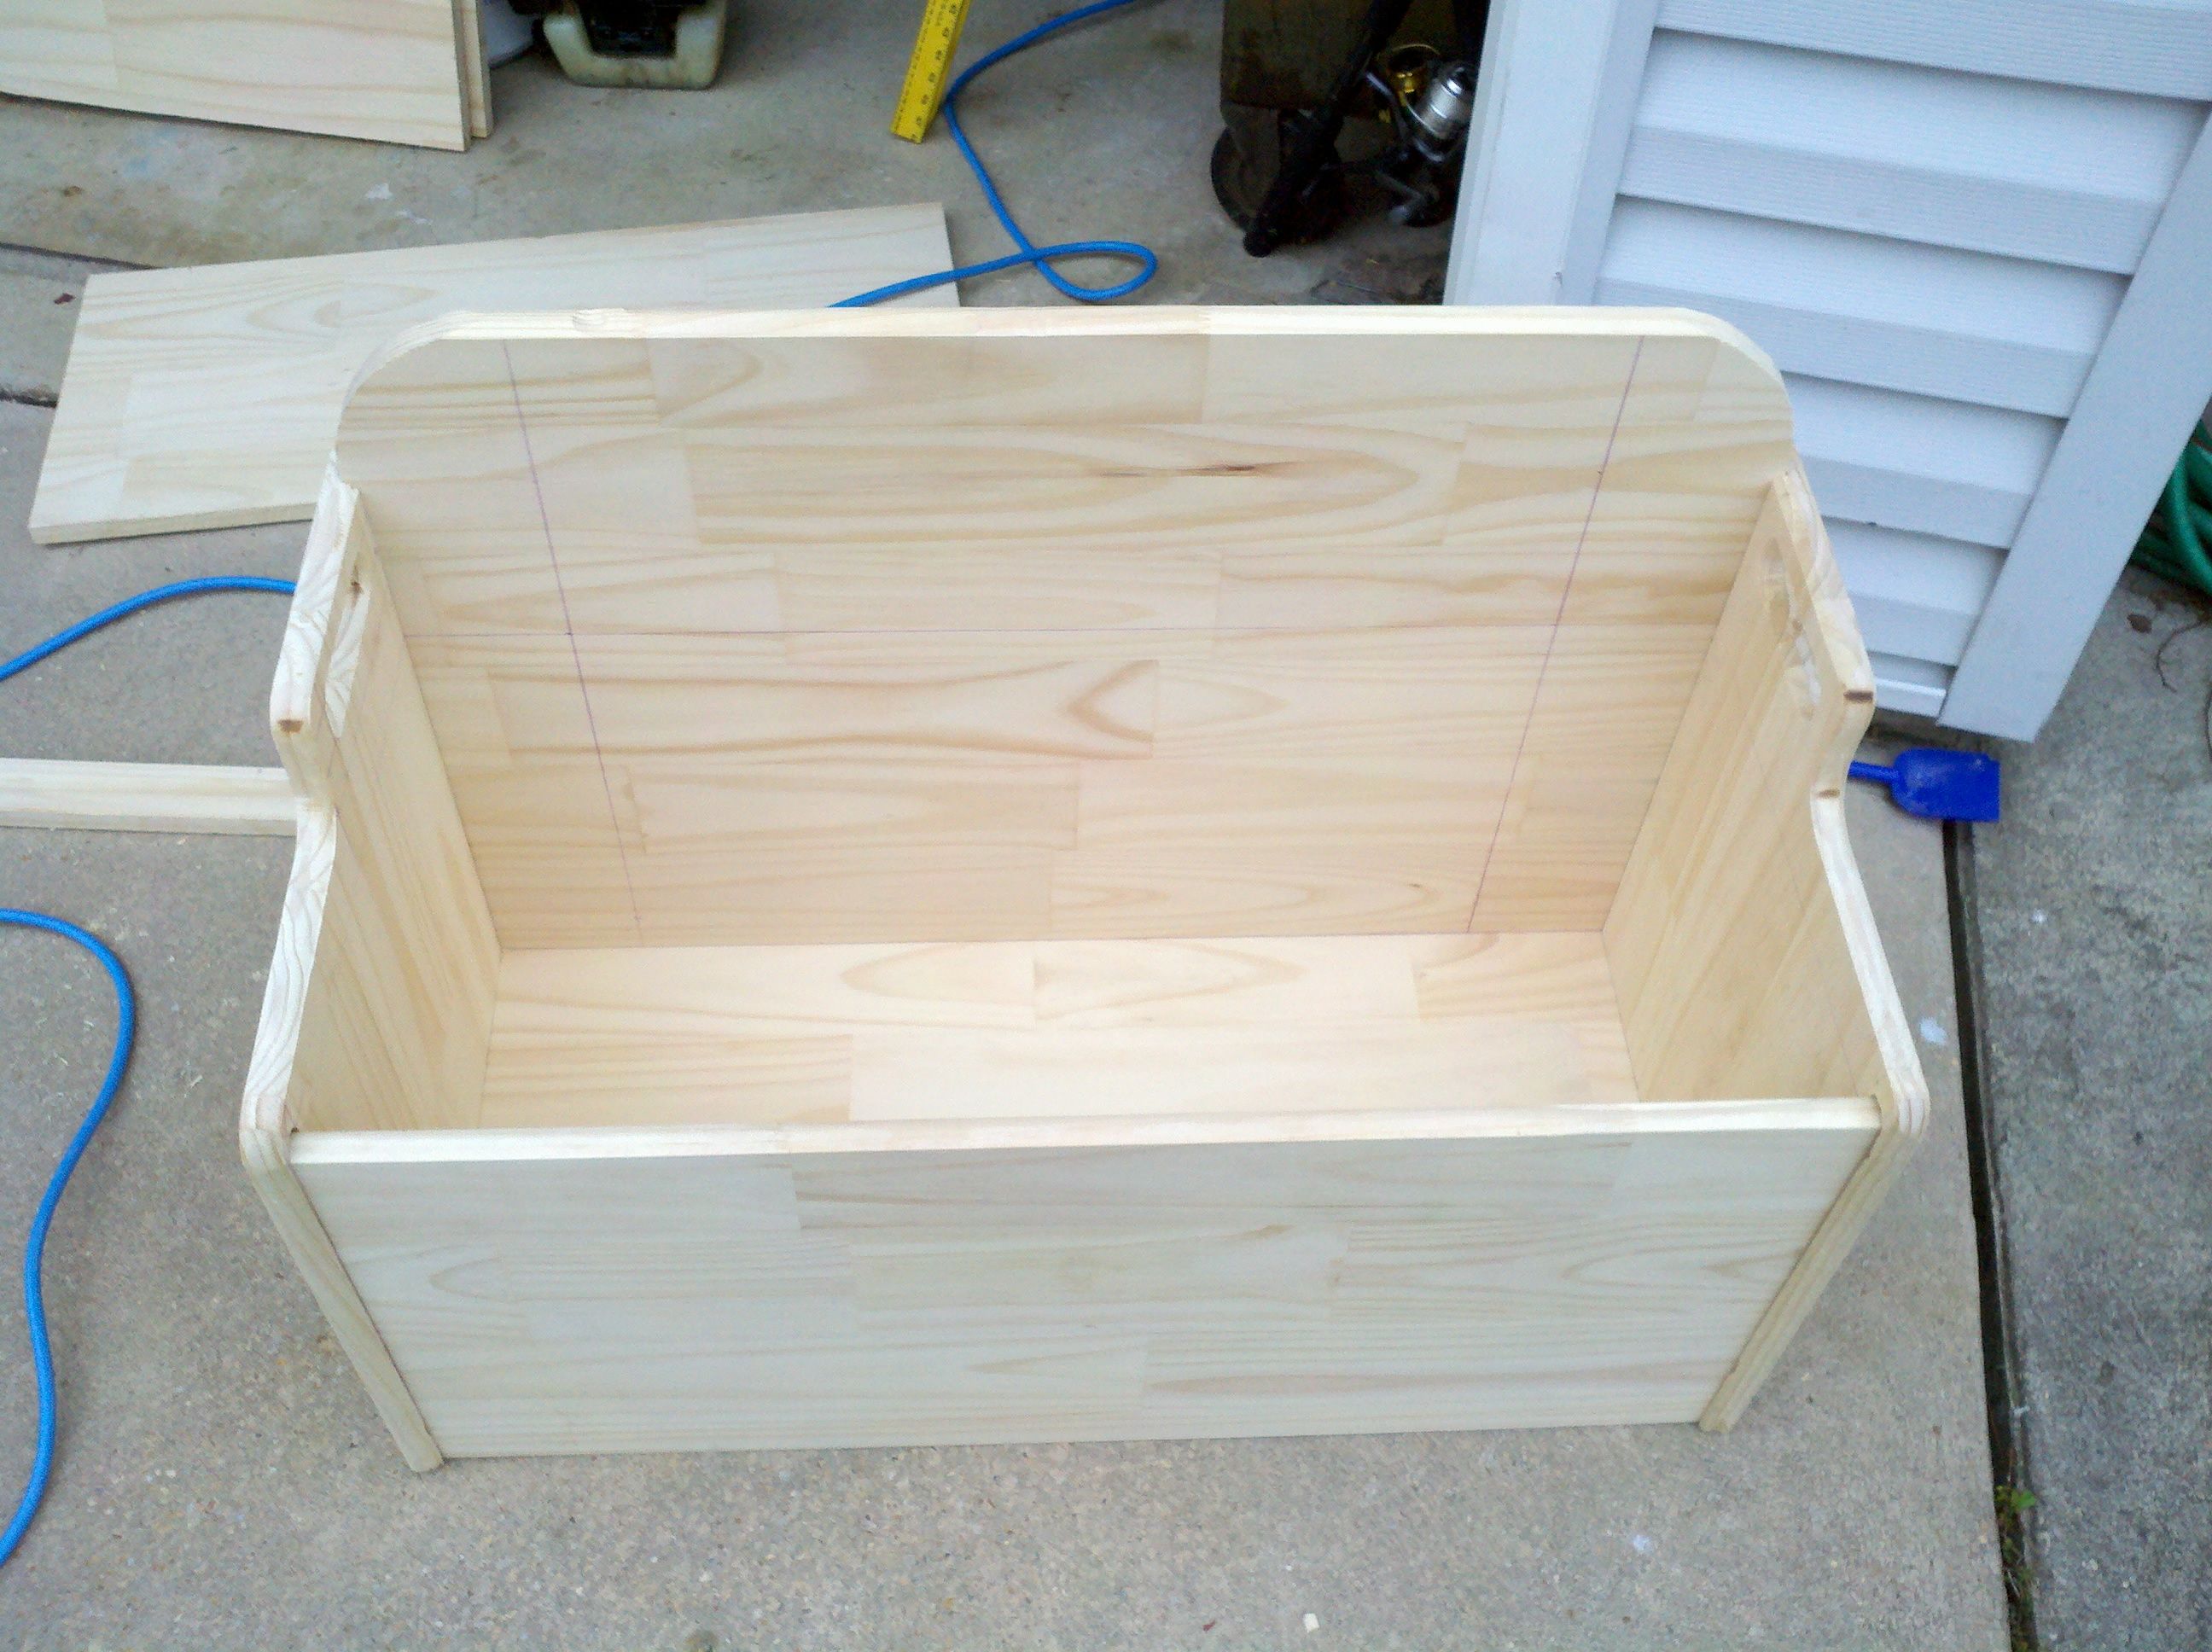 Toy Box with no lid